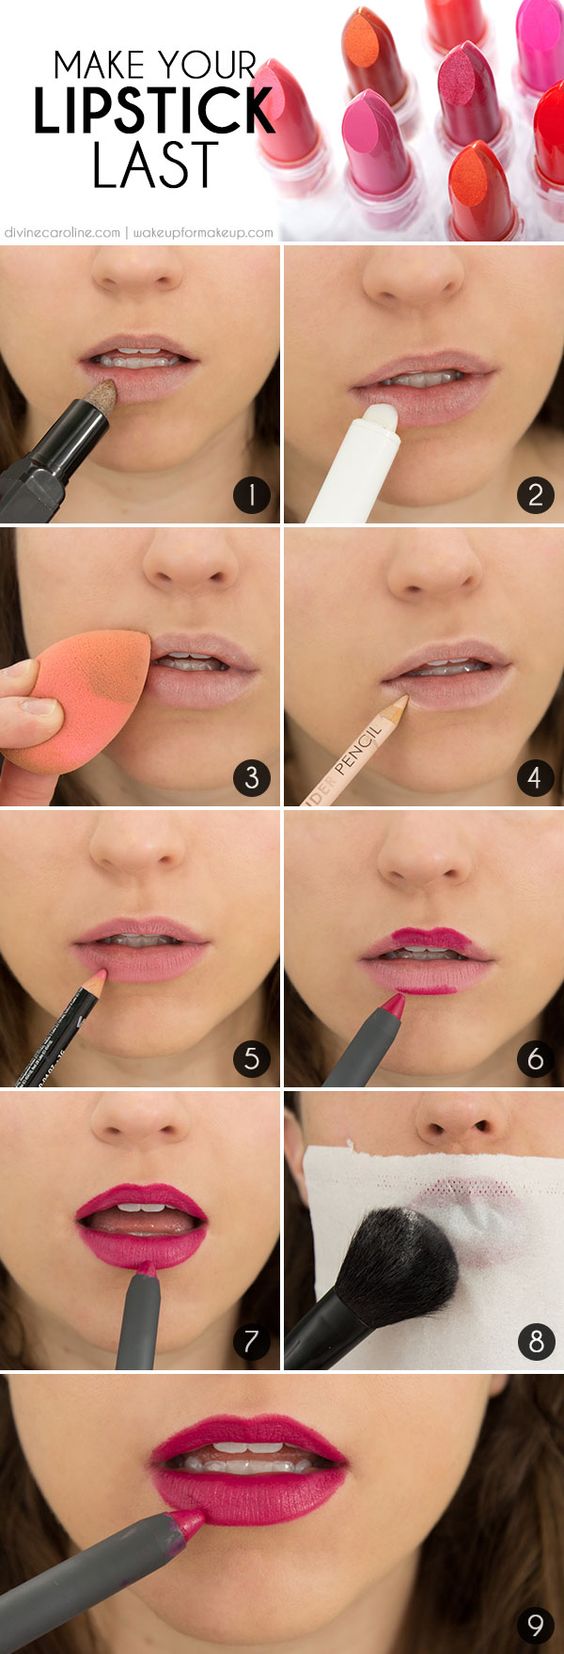 17 Beauty Tips and Tricks You Cannot Live Without